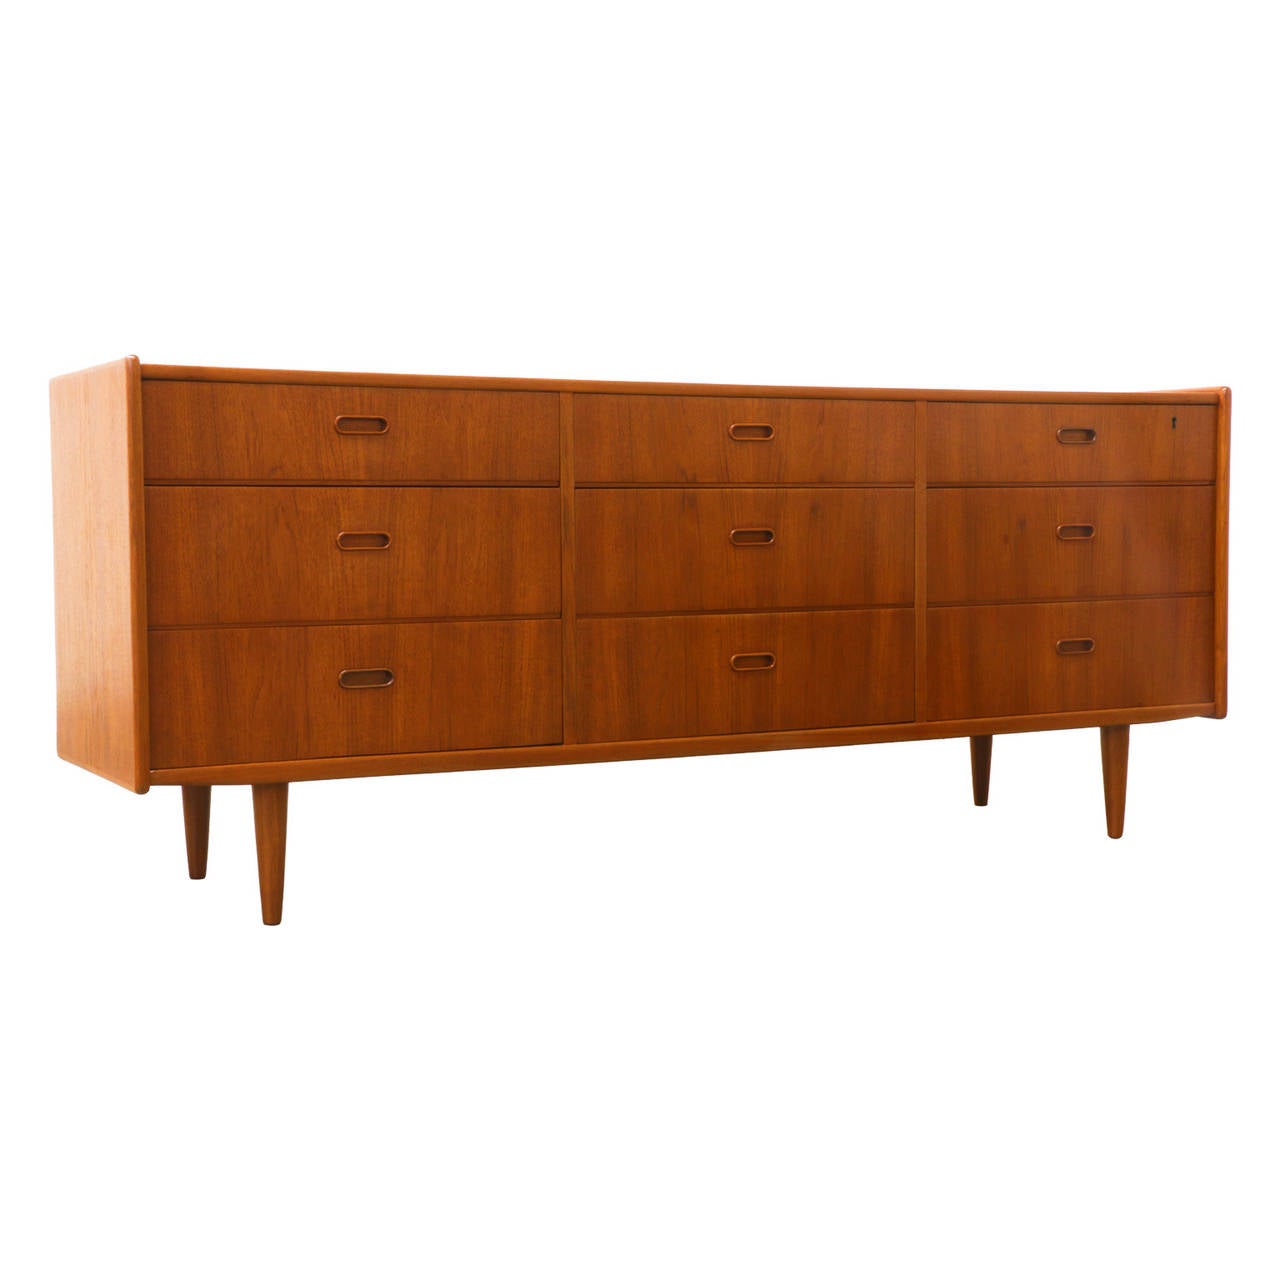 Designer: Unknown
Manufacturer: Unknown
Period/Style: Danish Modern
Country: Denmark
Date: 1960’s

Dimensions: 29″H x 71.75″L x 17.75″W
Materials: Teak
Condition: Excellent – Newly Refinished
Number of Items: 1
ID Number: